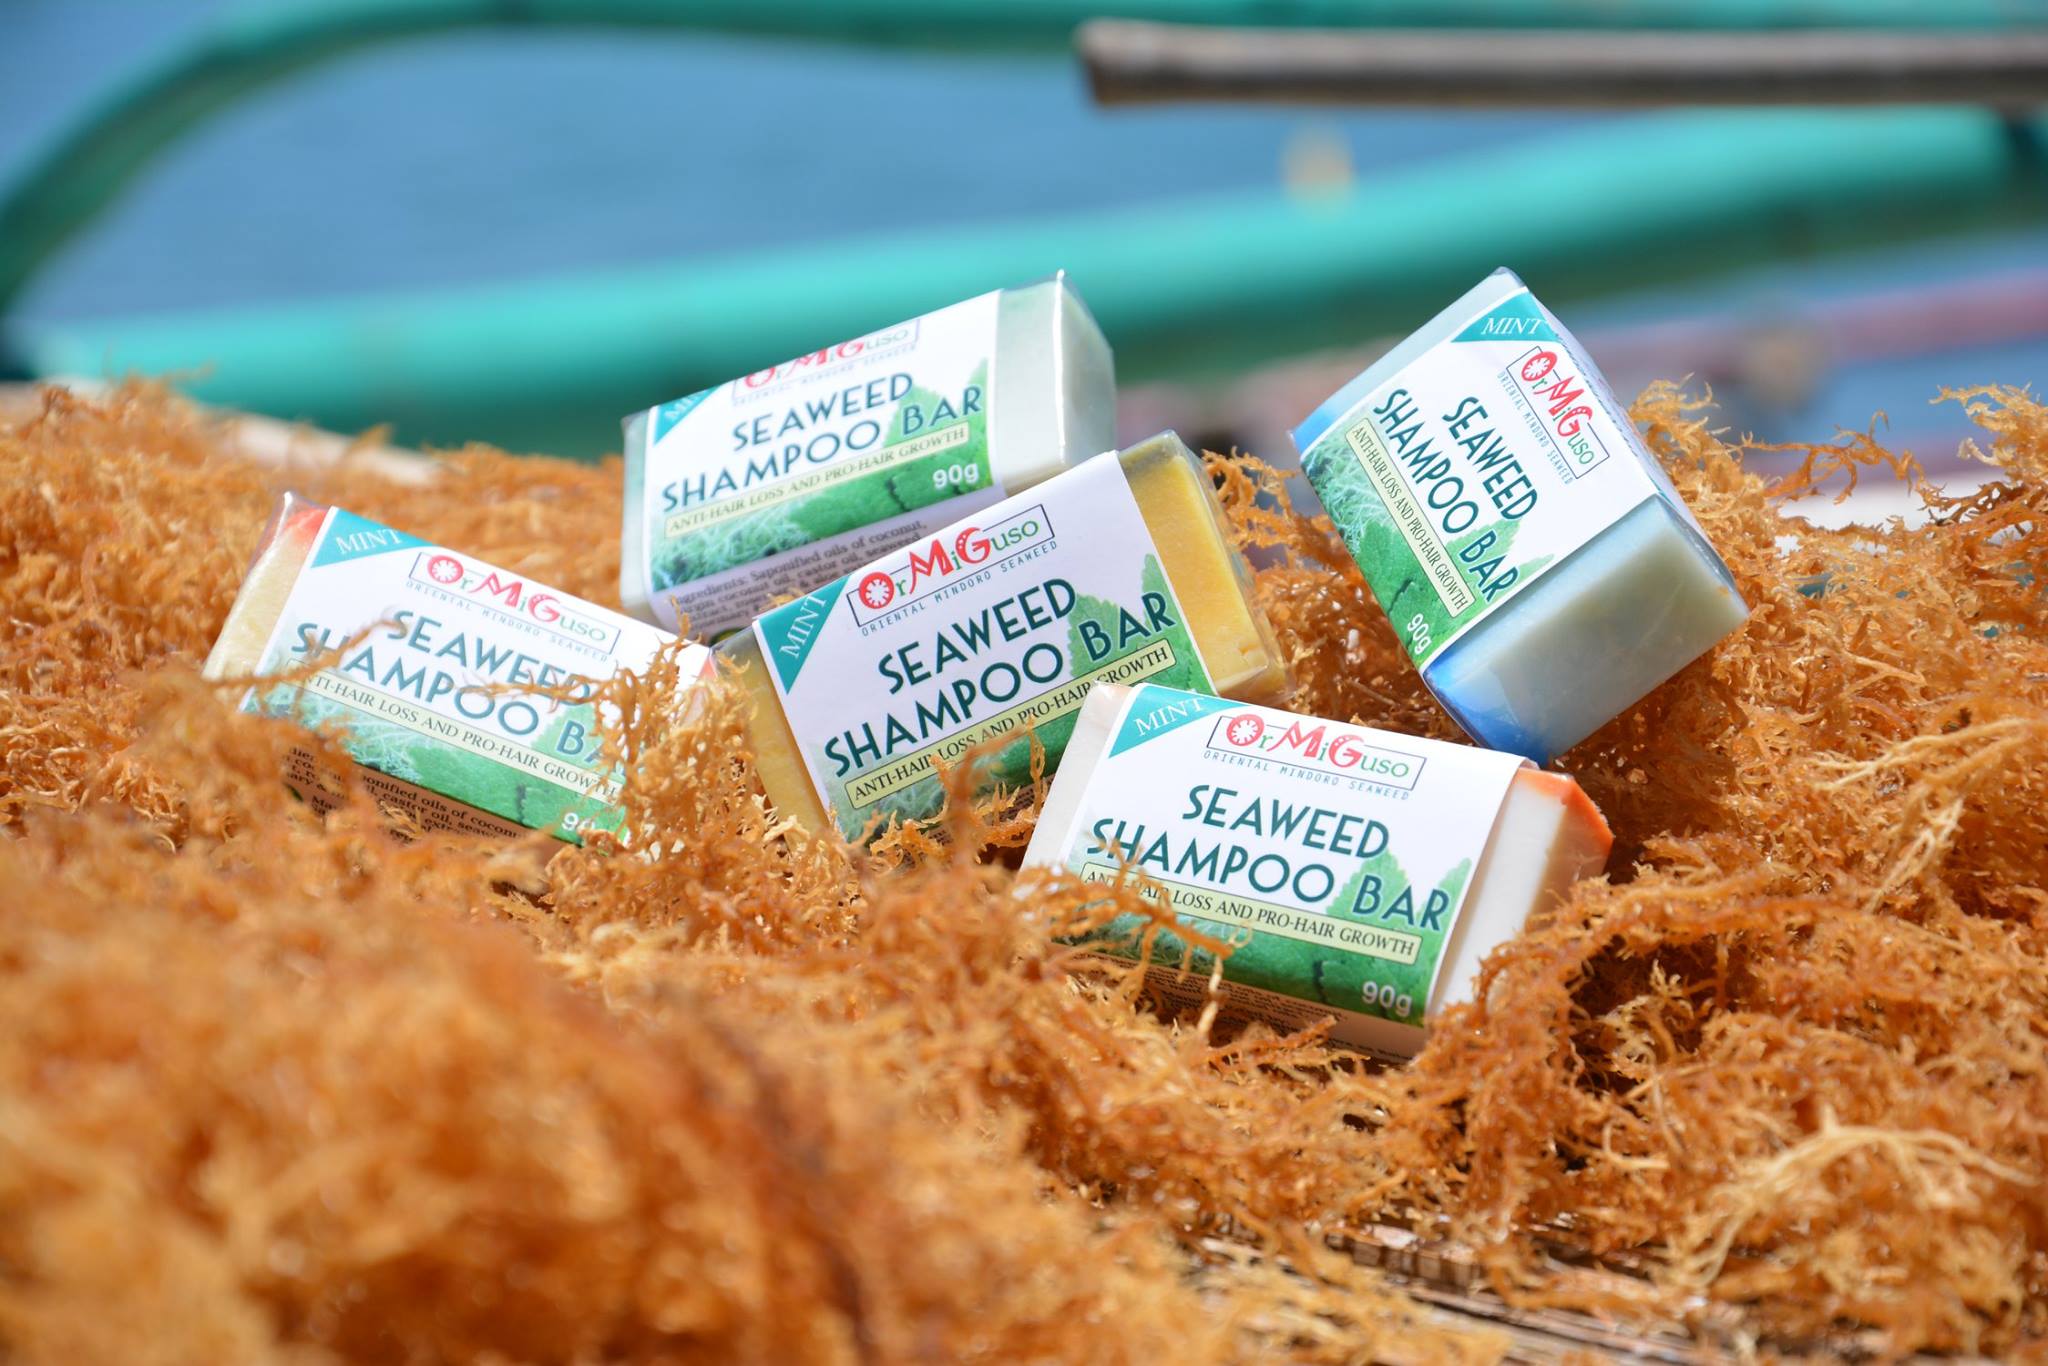 Seaweed for a Better Life